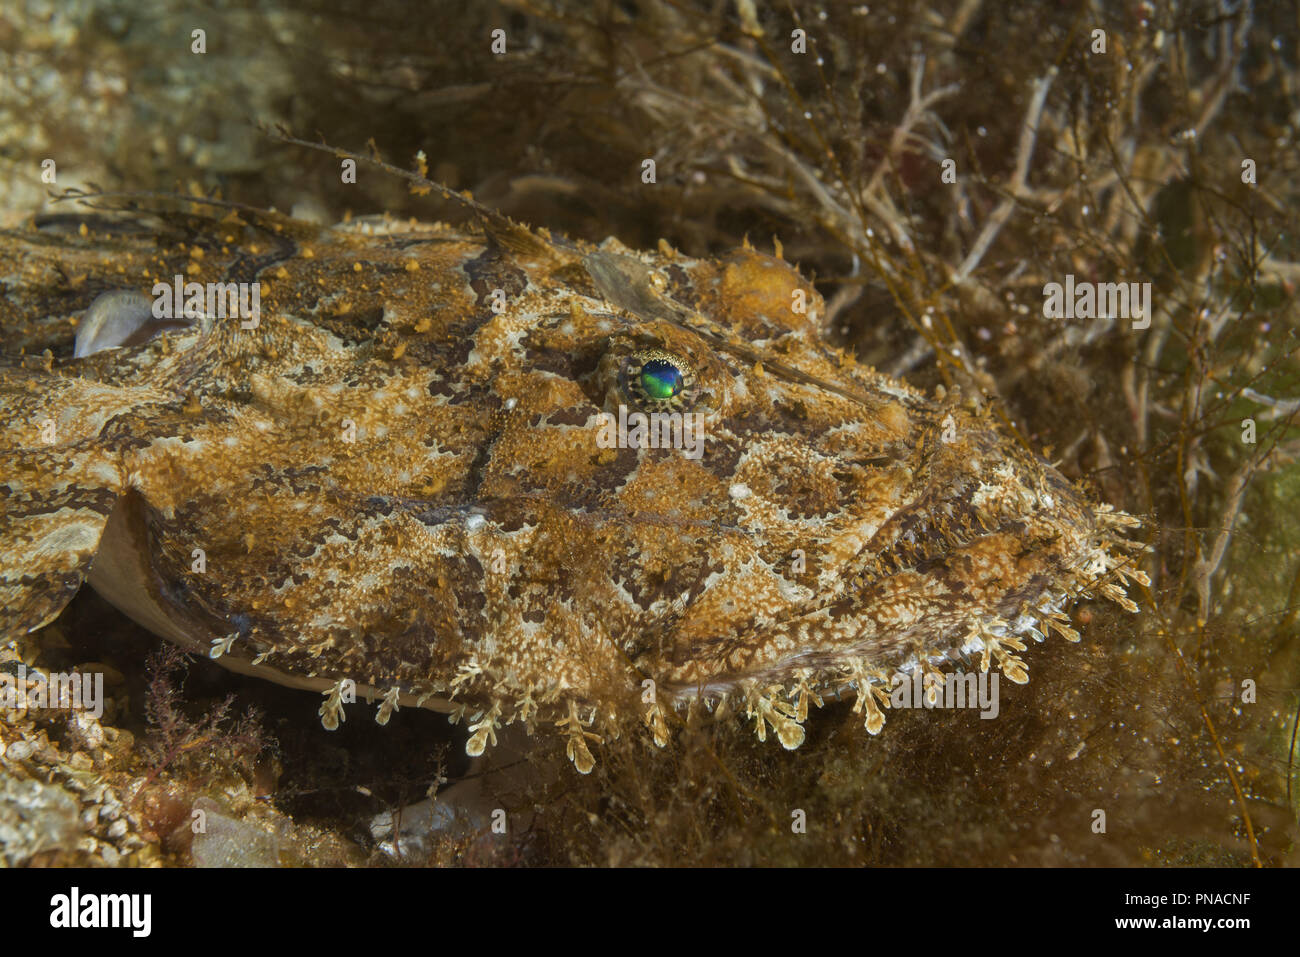 Sea Fish Lophius Piscatorius On Fishing Rod Stock Photo, Picture and  Royalty Free Image. Image 79376842.